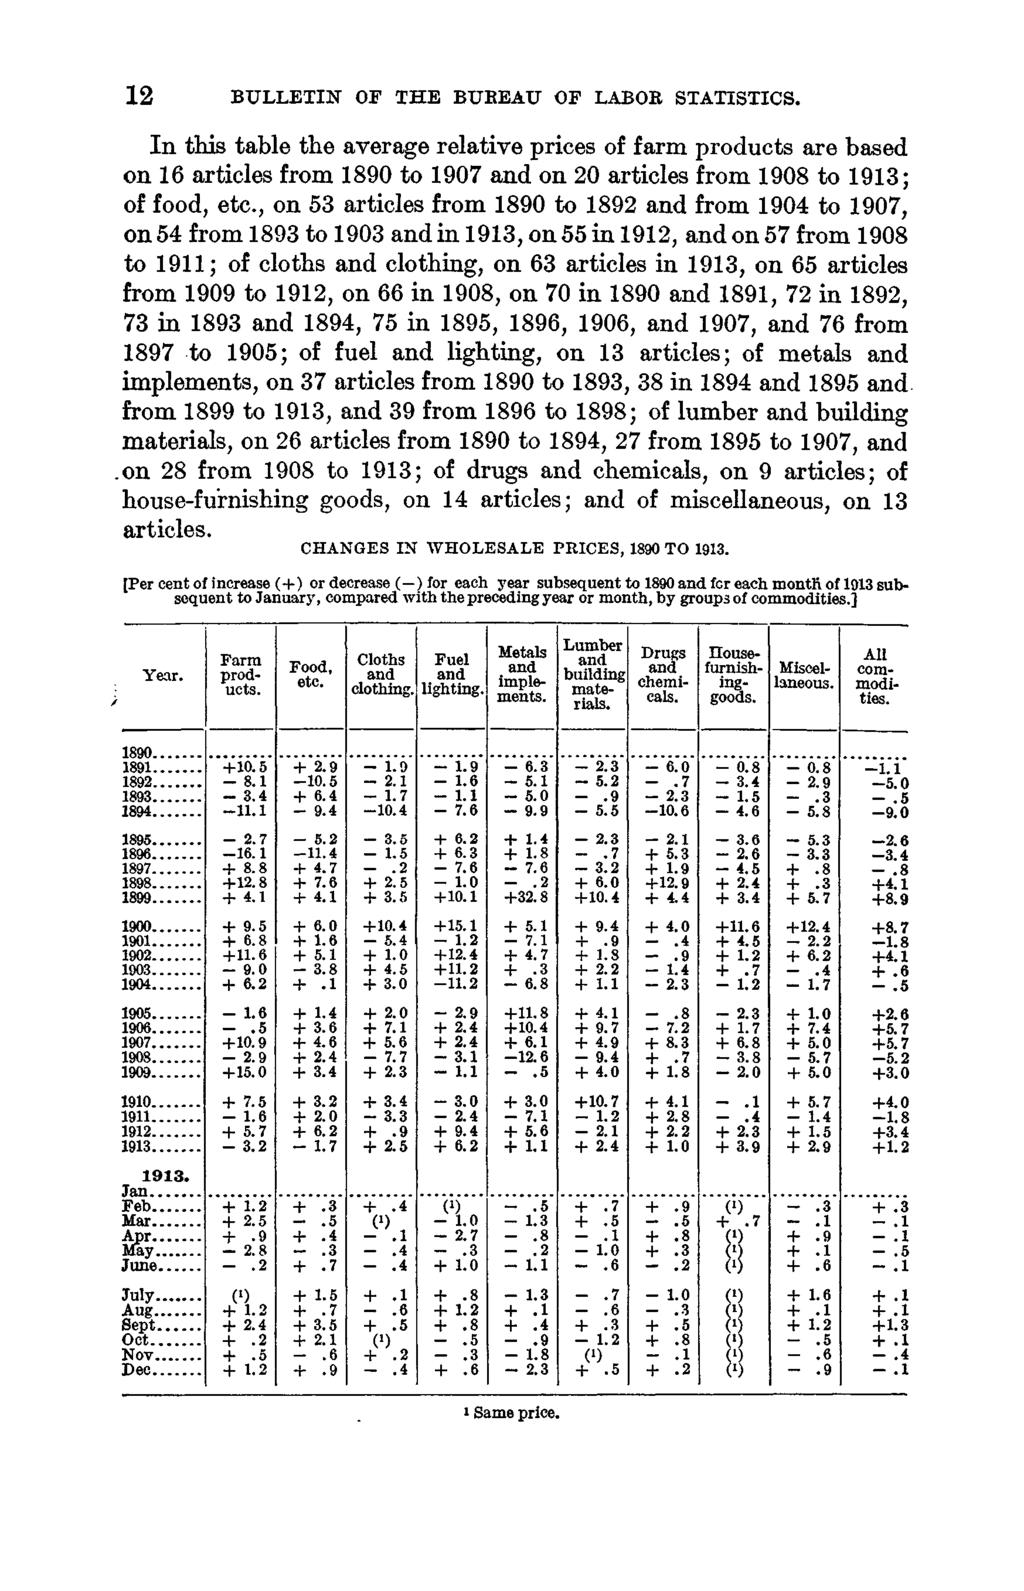 12 BULLETIN OF THE BUBEAU OF LABOB STATISTICS. In this table the average relative s of farm products are based on 16 articles from 1890 to 1907 and on 20 articles from 1908 to 1913; of food, etc.